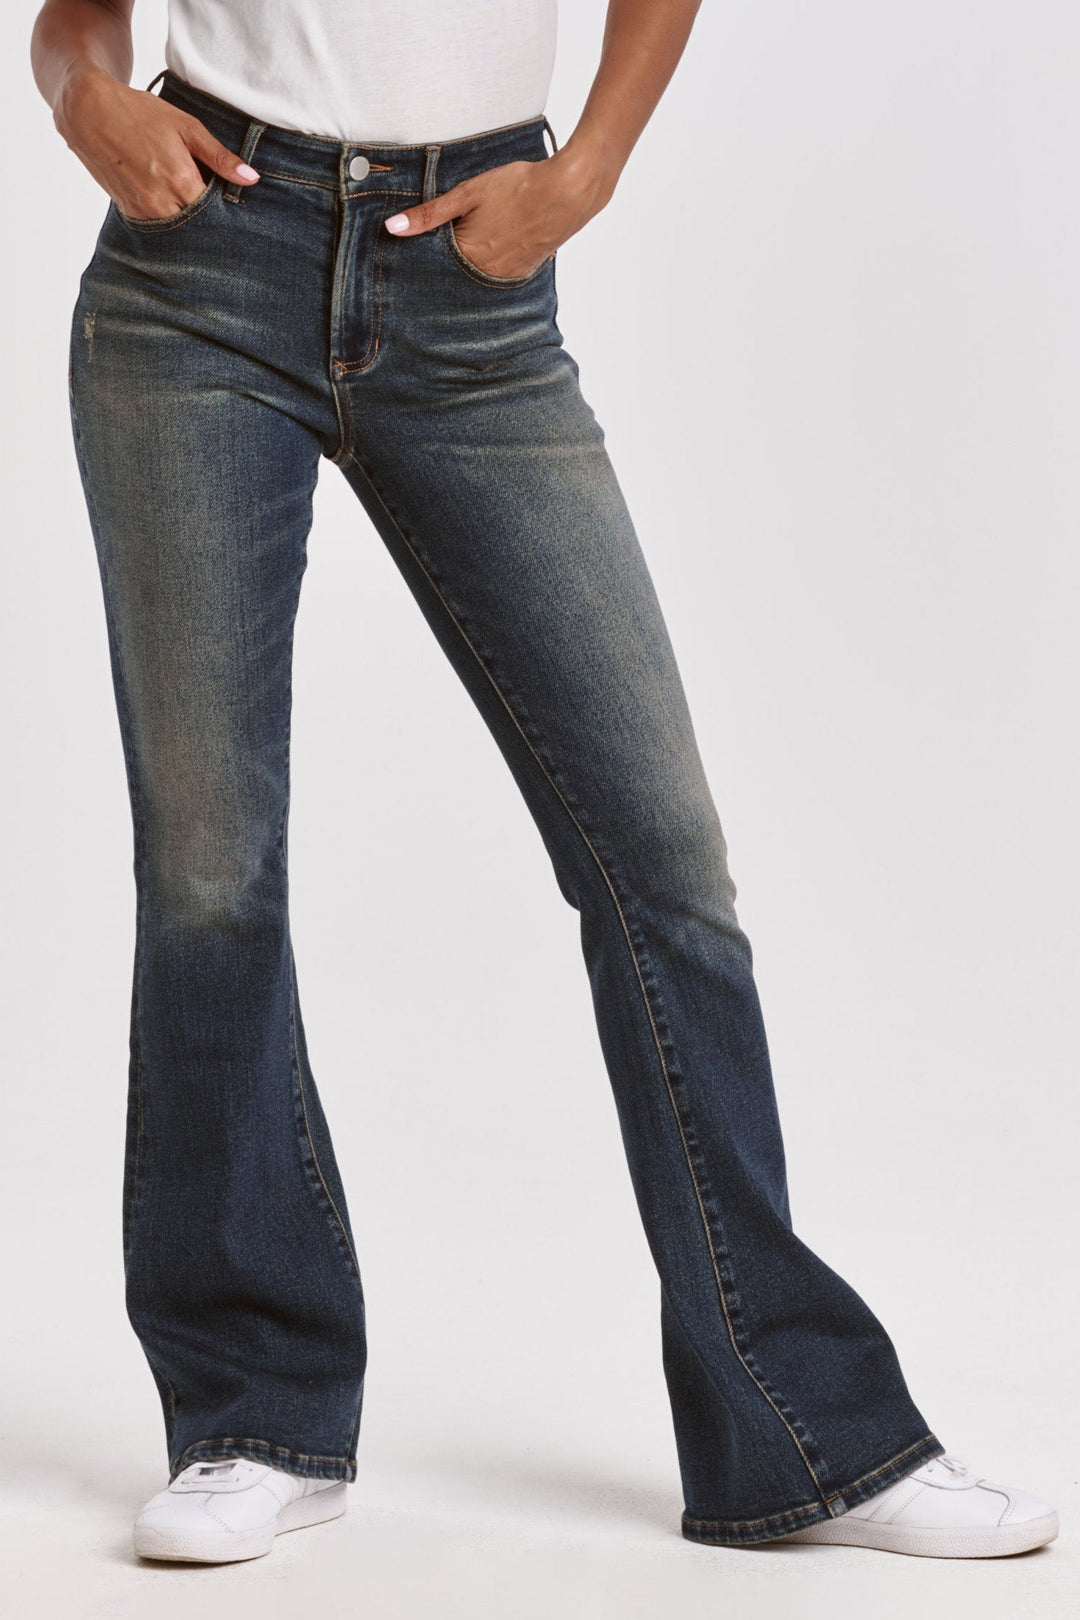 rosa-high-rise-flare-jeans-osario